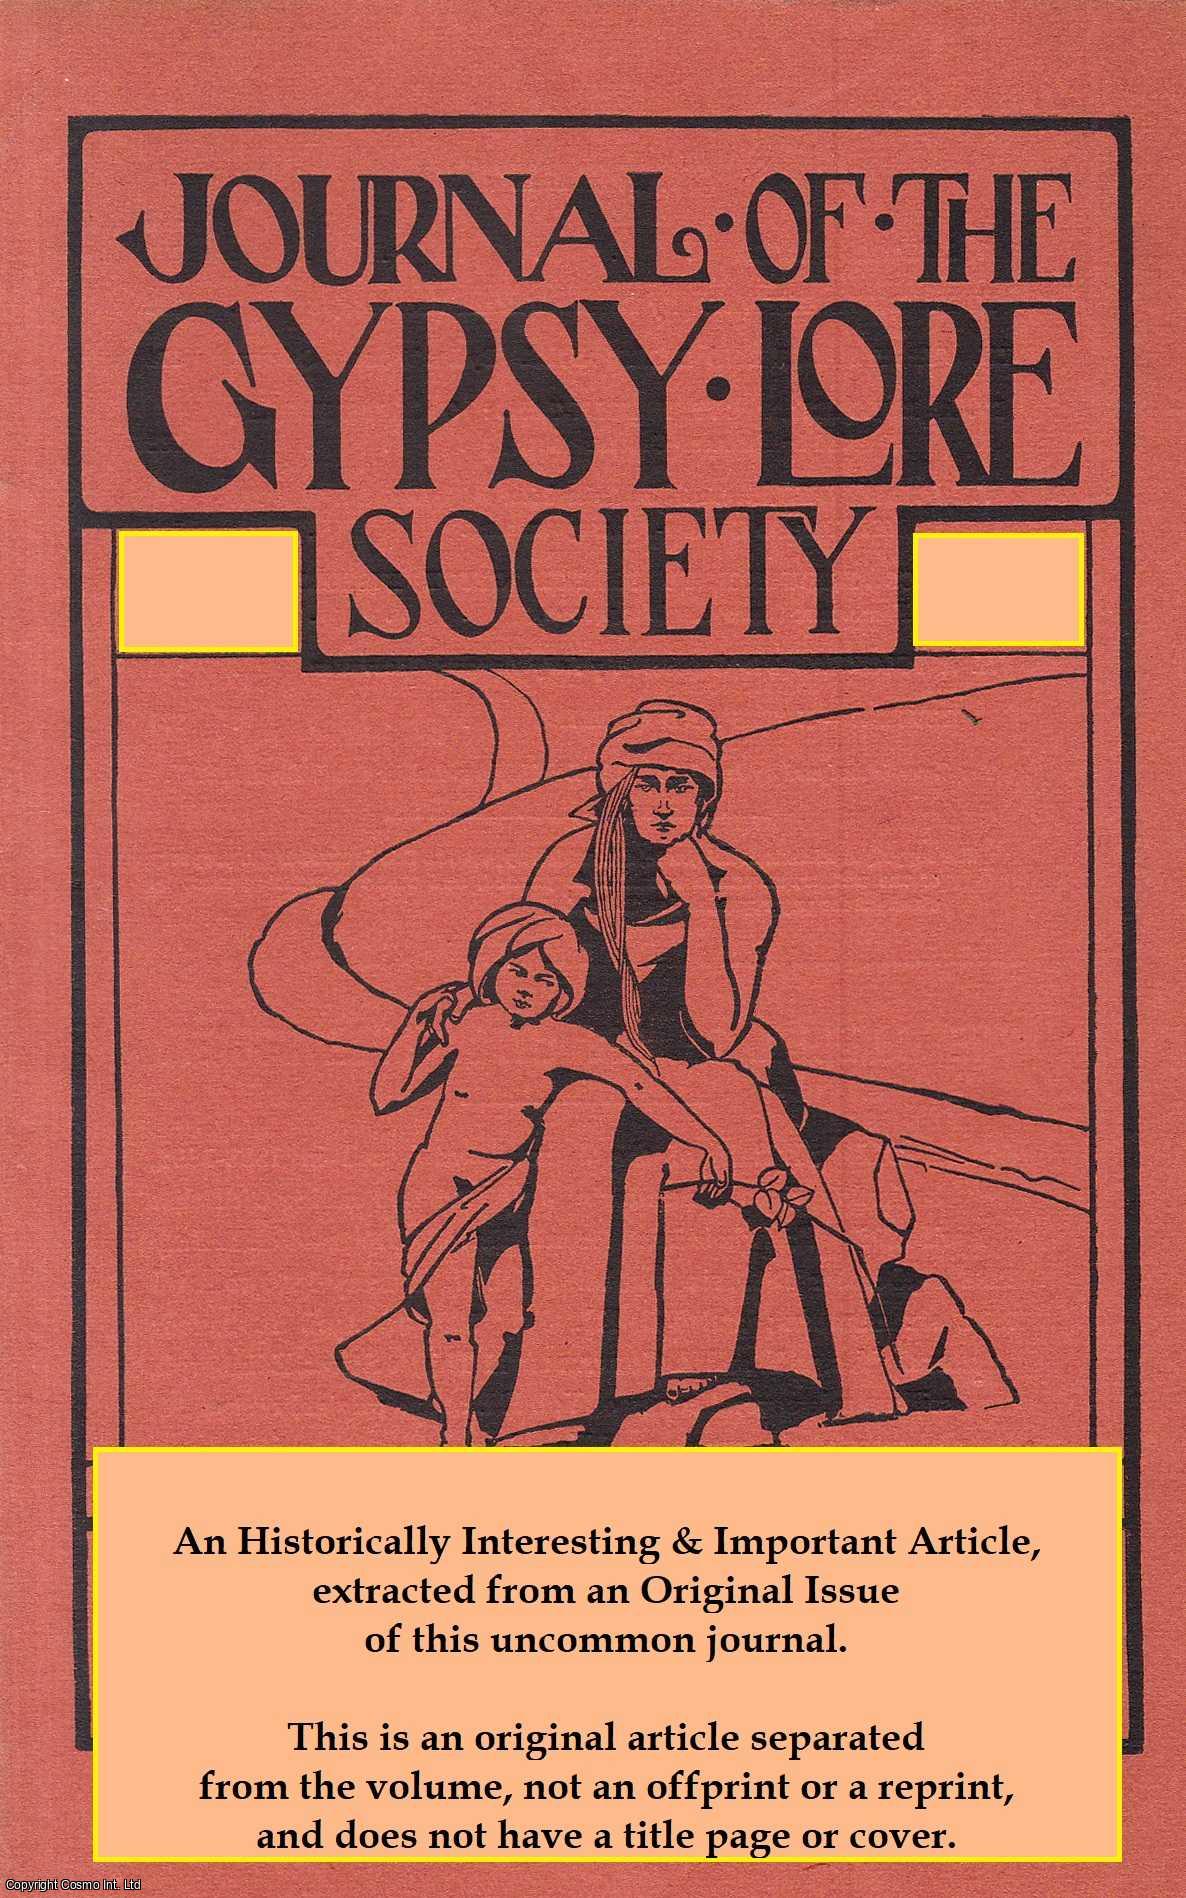 Walter Starkie - Augustus John, O.M.: Our Past President and His Daemon. An uncommon original article from the Journal of the Gypsy Lore Society, 1962.